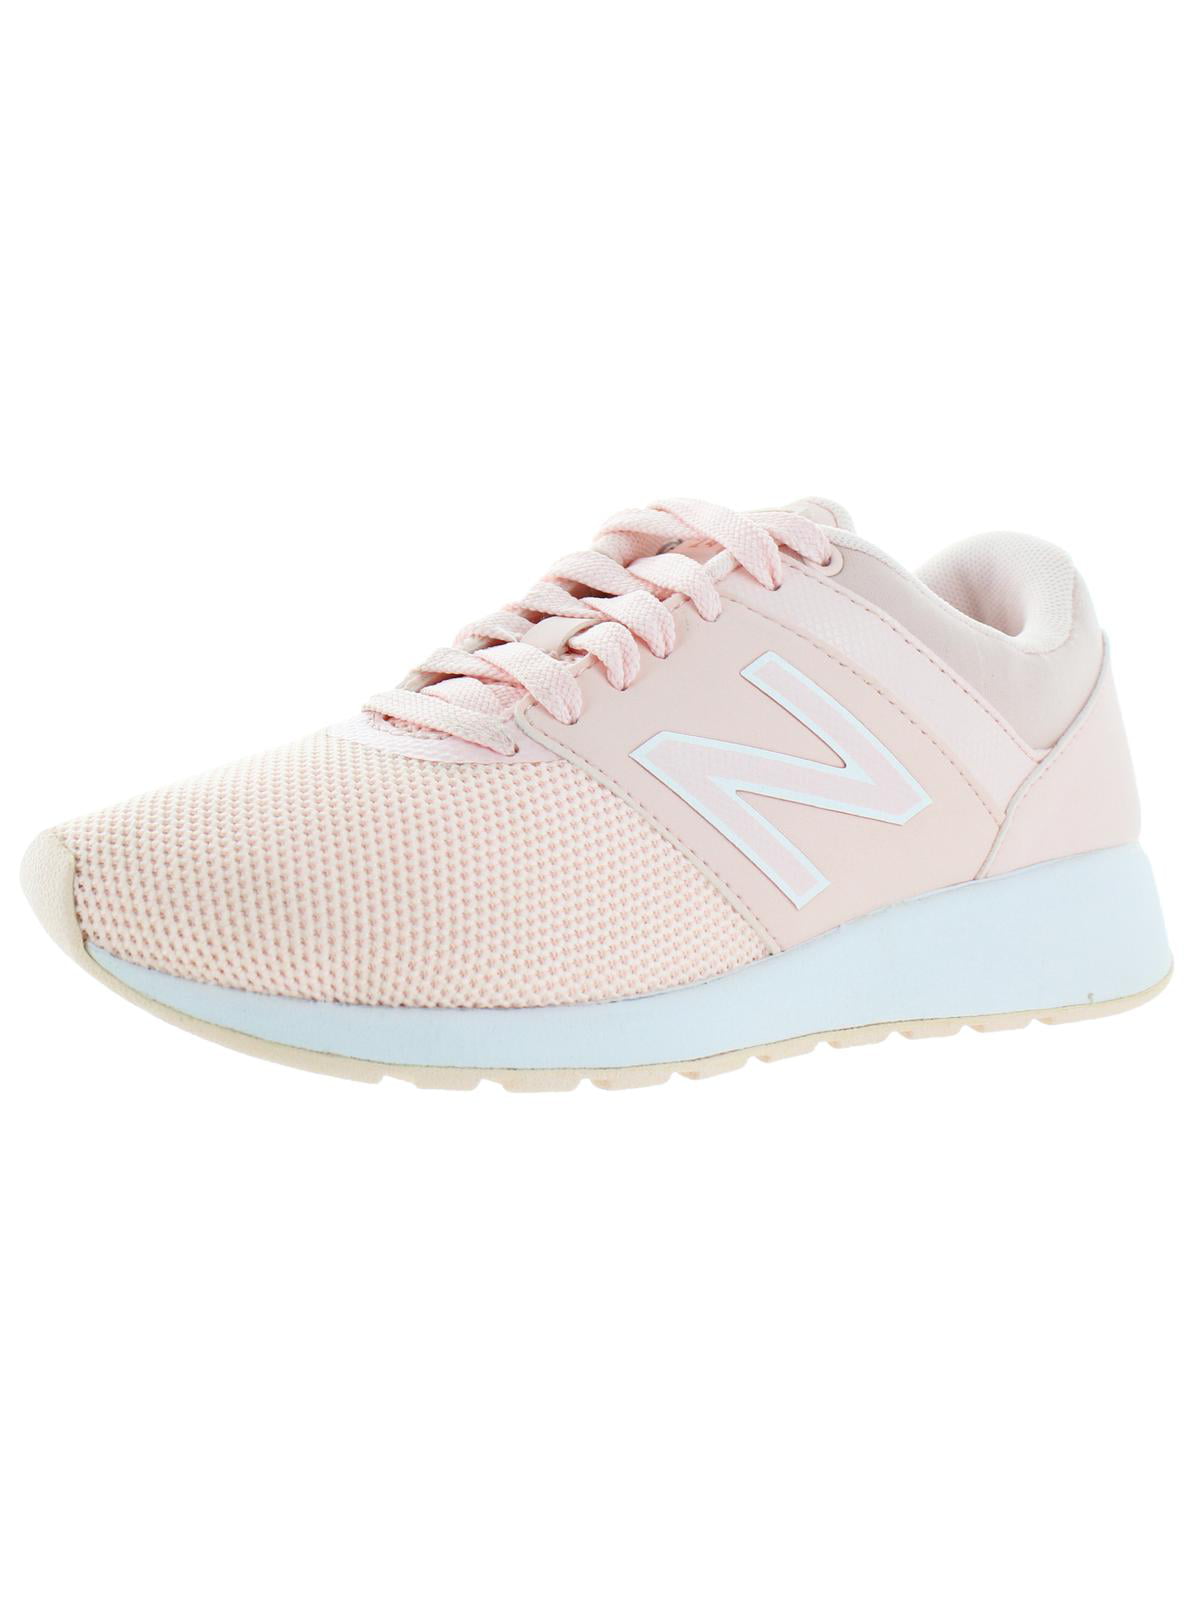 new balance womens shoes pink